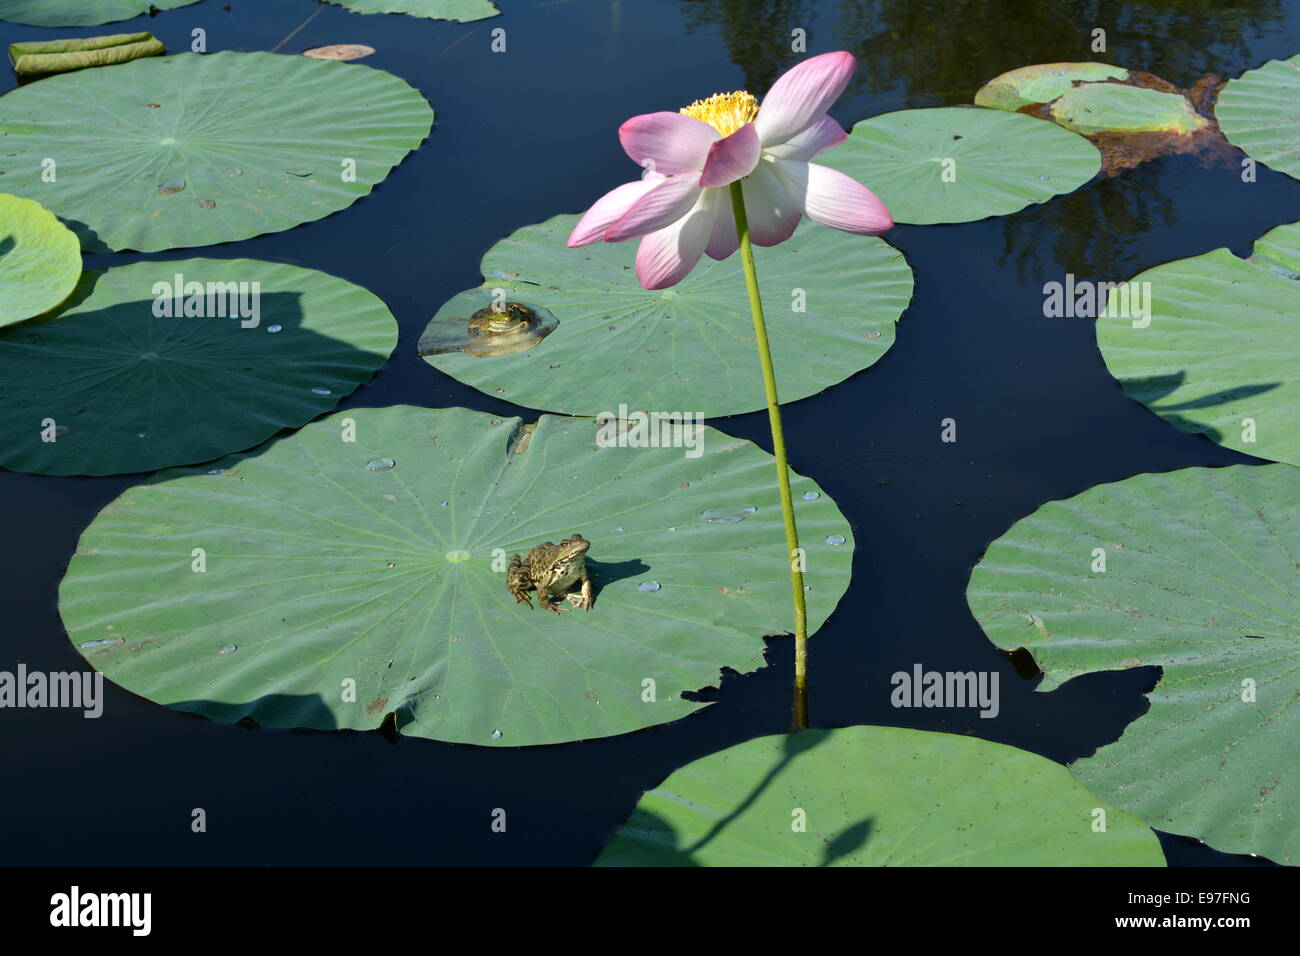 Two cute frogs on lotus leaves watching a big pink flower in the pond Stock Photo